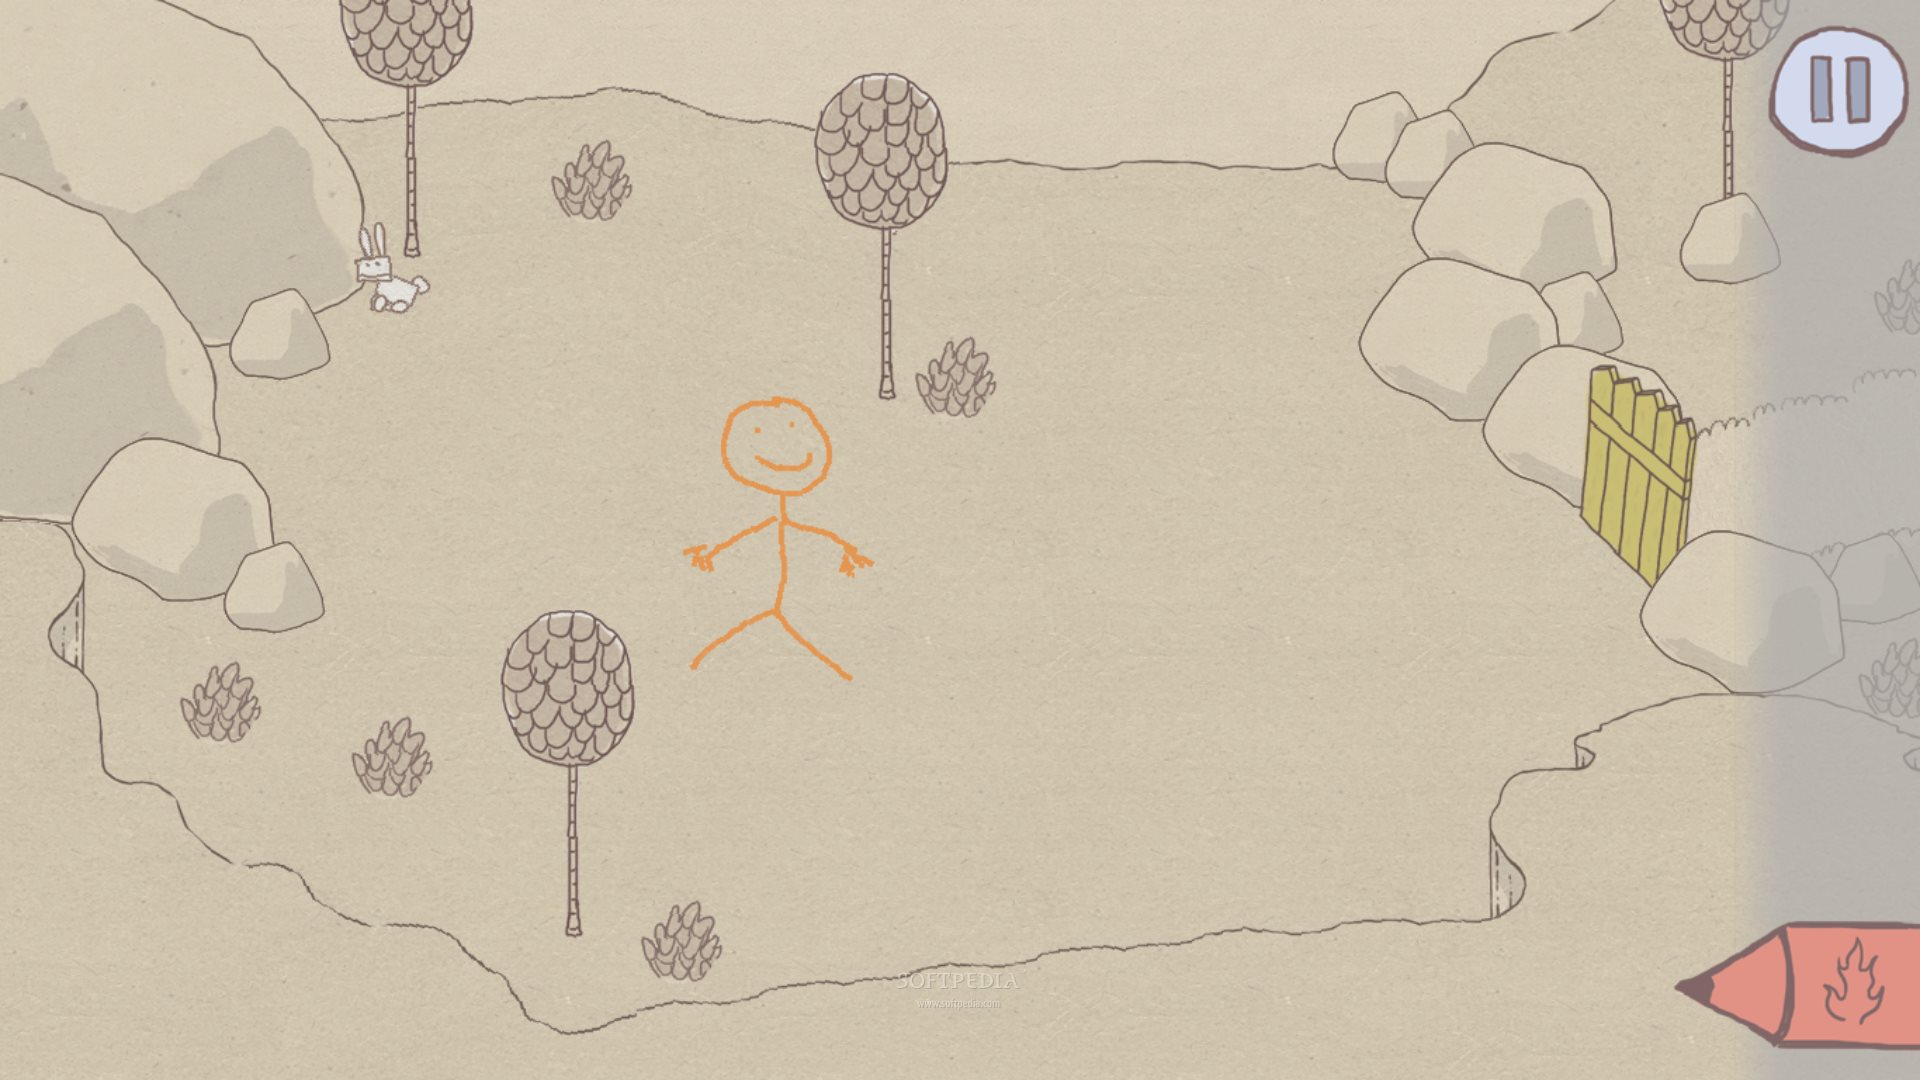 Draw a Stickman: EPIC Free download the last version for windows